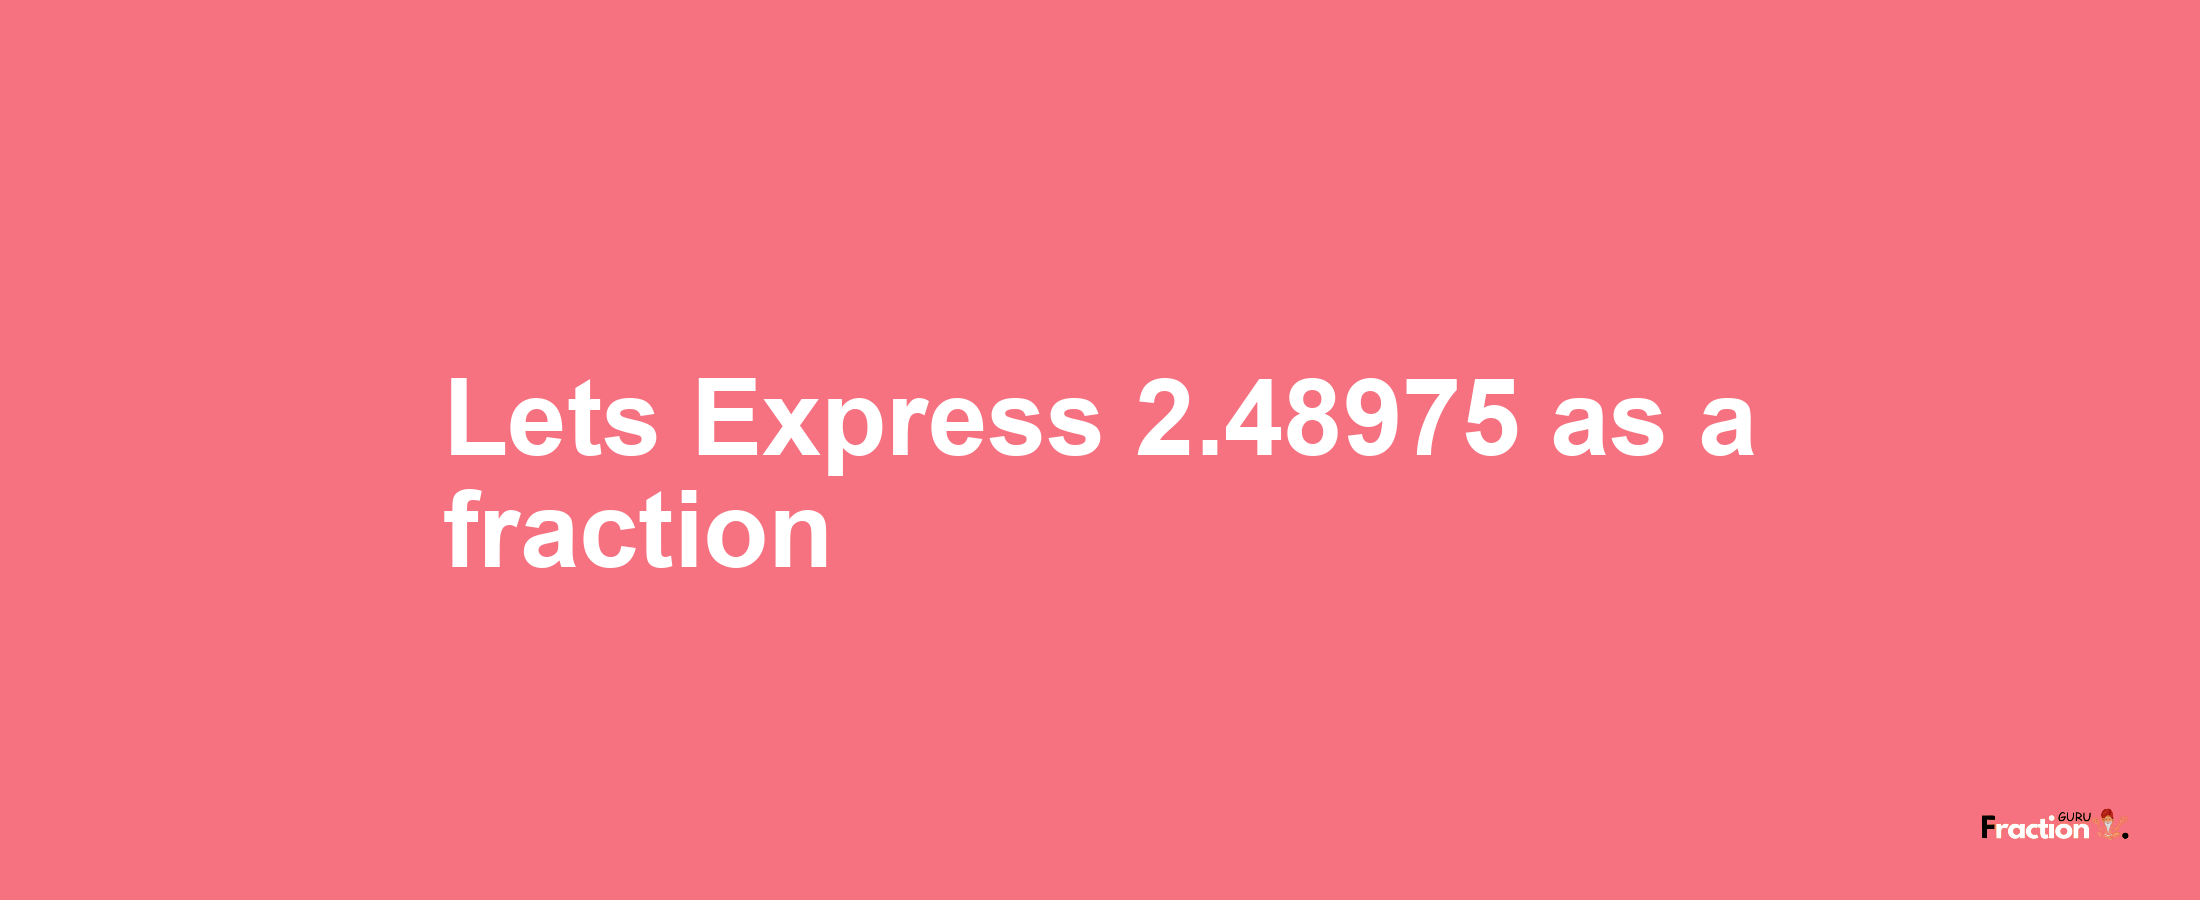 Lets Express 2.48975 as afraction